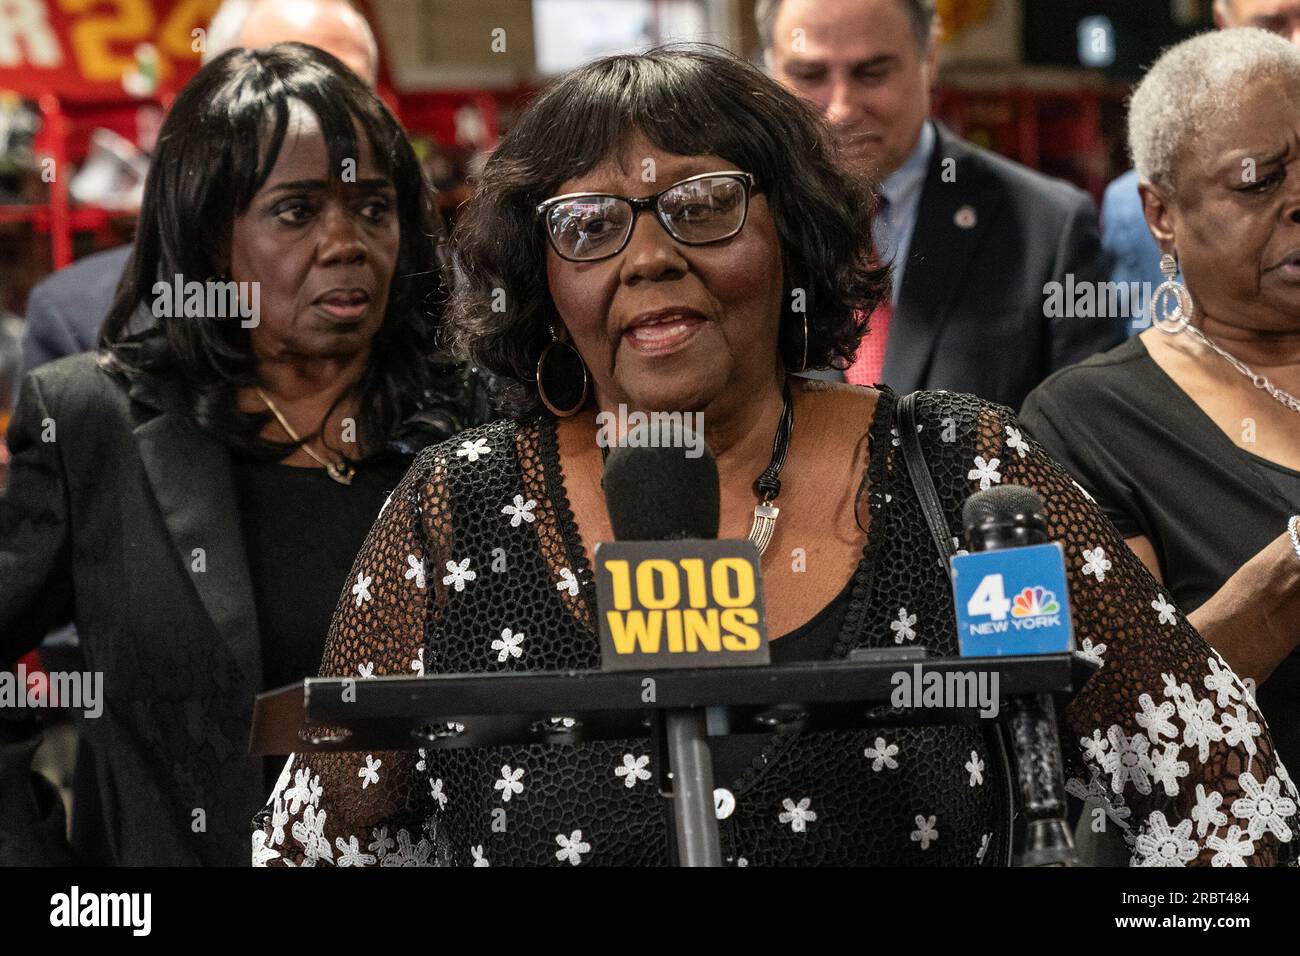 New York, USA. 10th July, 2023. Gwendolyn Gamble speaks at press conference on anniversary of Children's Crusade or Children's March as it is known at FDNY Engine 1, Ladder 24 station in New York. March was held in Birmingham, Alabama on 2 - 10 May, 1963 and was attended by more than 5,000 school children, 3 of them joined this press conference: Gloria Washington, Gwendolyn Gamble, Gwyndolyn Webb. Members of FDNY at the time stood up against the City of Birmingham fire department using force against children. (Photo by Lev Radin/Pacific Press) Credit: Pacific Press Media Production Corp./Alamy Stock Photo